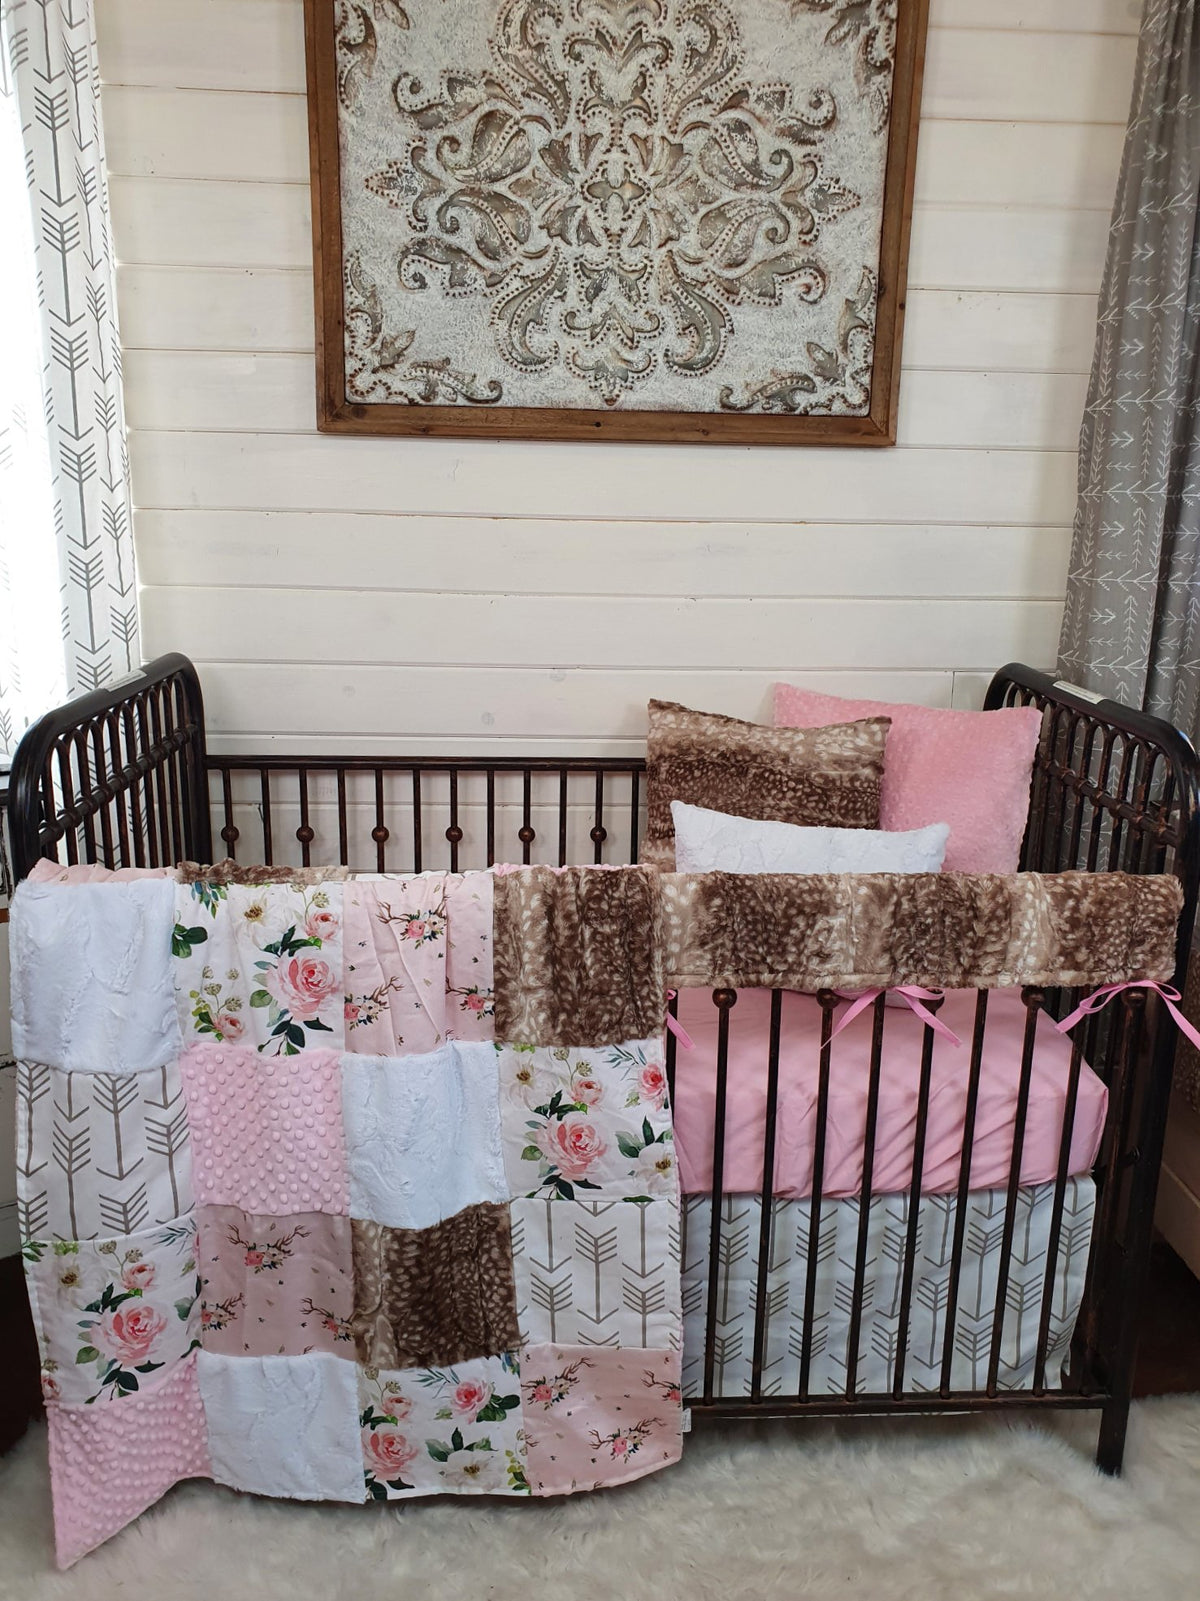 New Release Girl Crib Bedding- Blush Floral Antlers and Floral Baby Bedding Collection - DBC Baby Bedding Co 